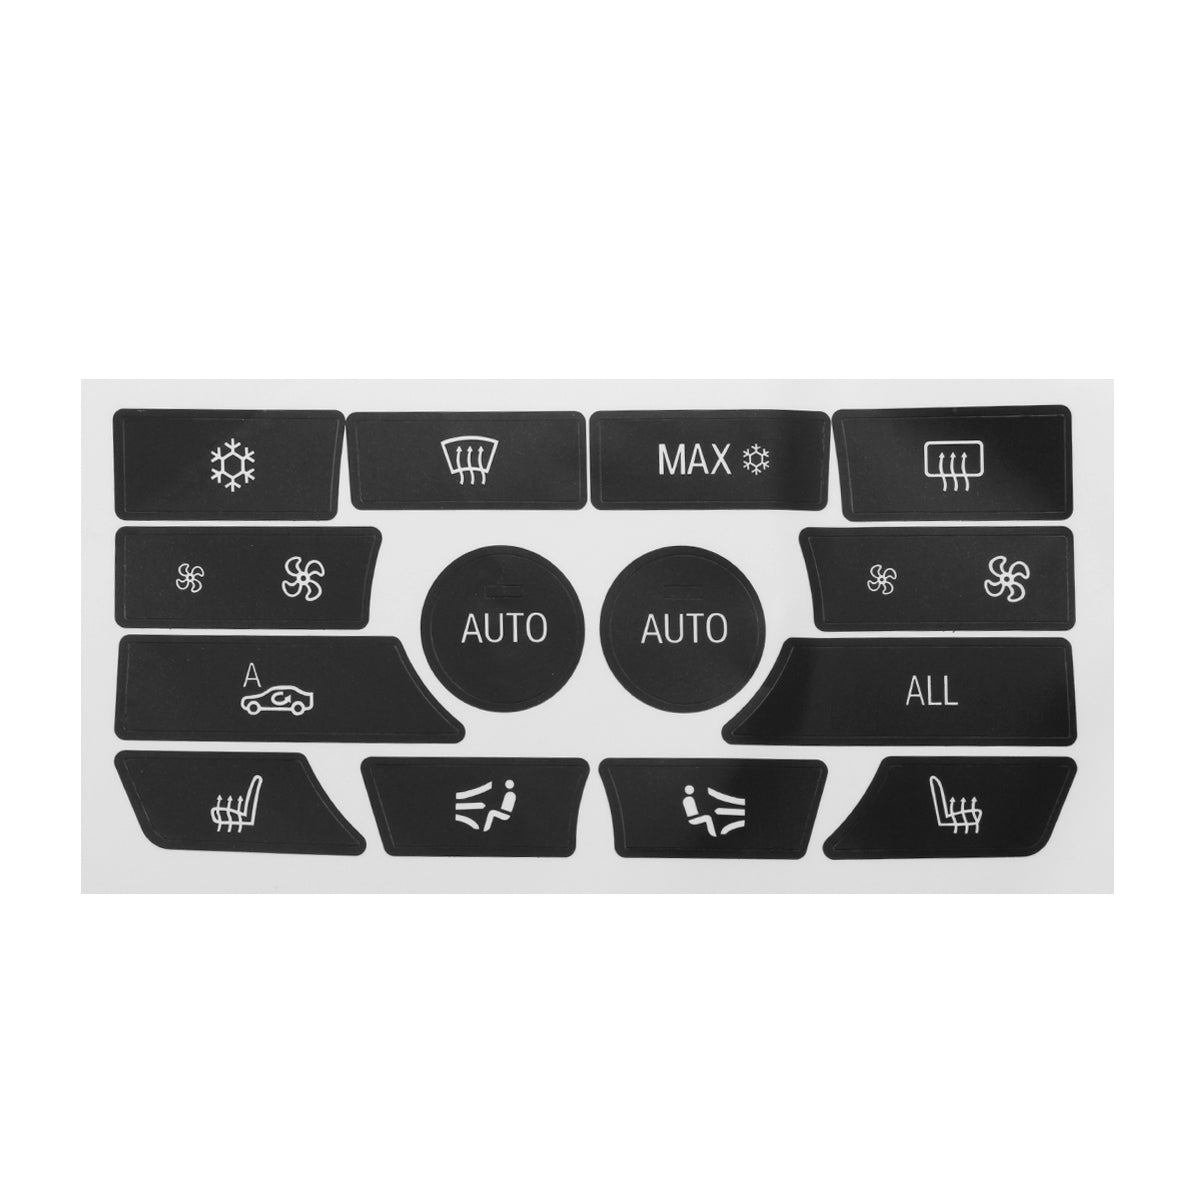 Dash Climate Control Car Stereo Panel Button Repair Decal Kit For BMW 5 Series 09-15 - Auto GoShop